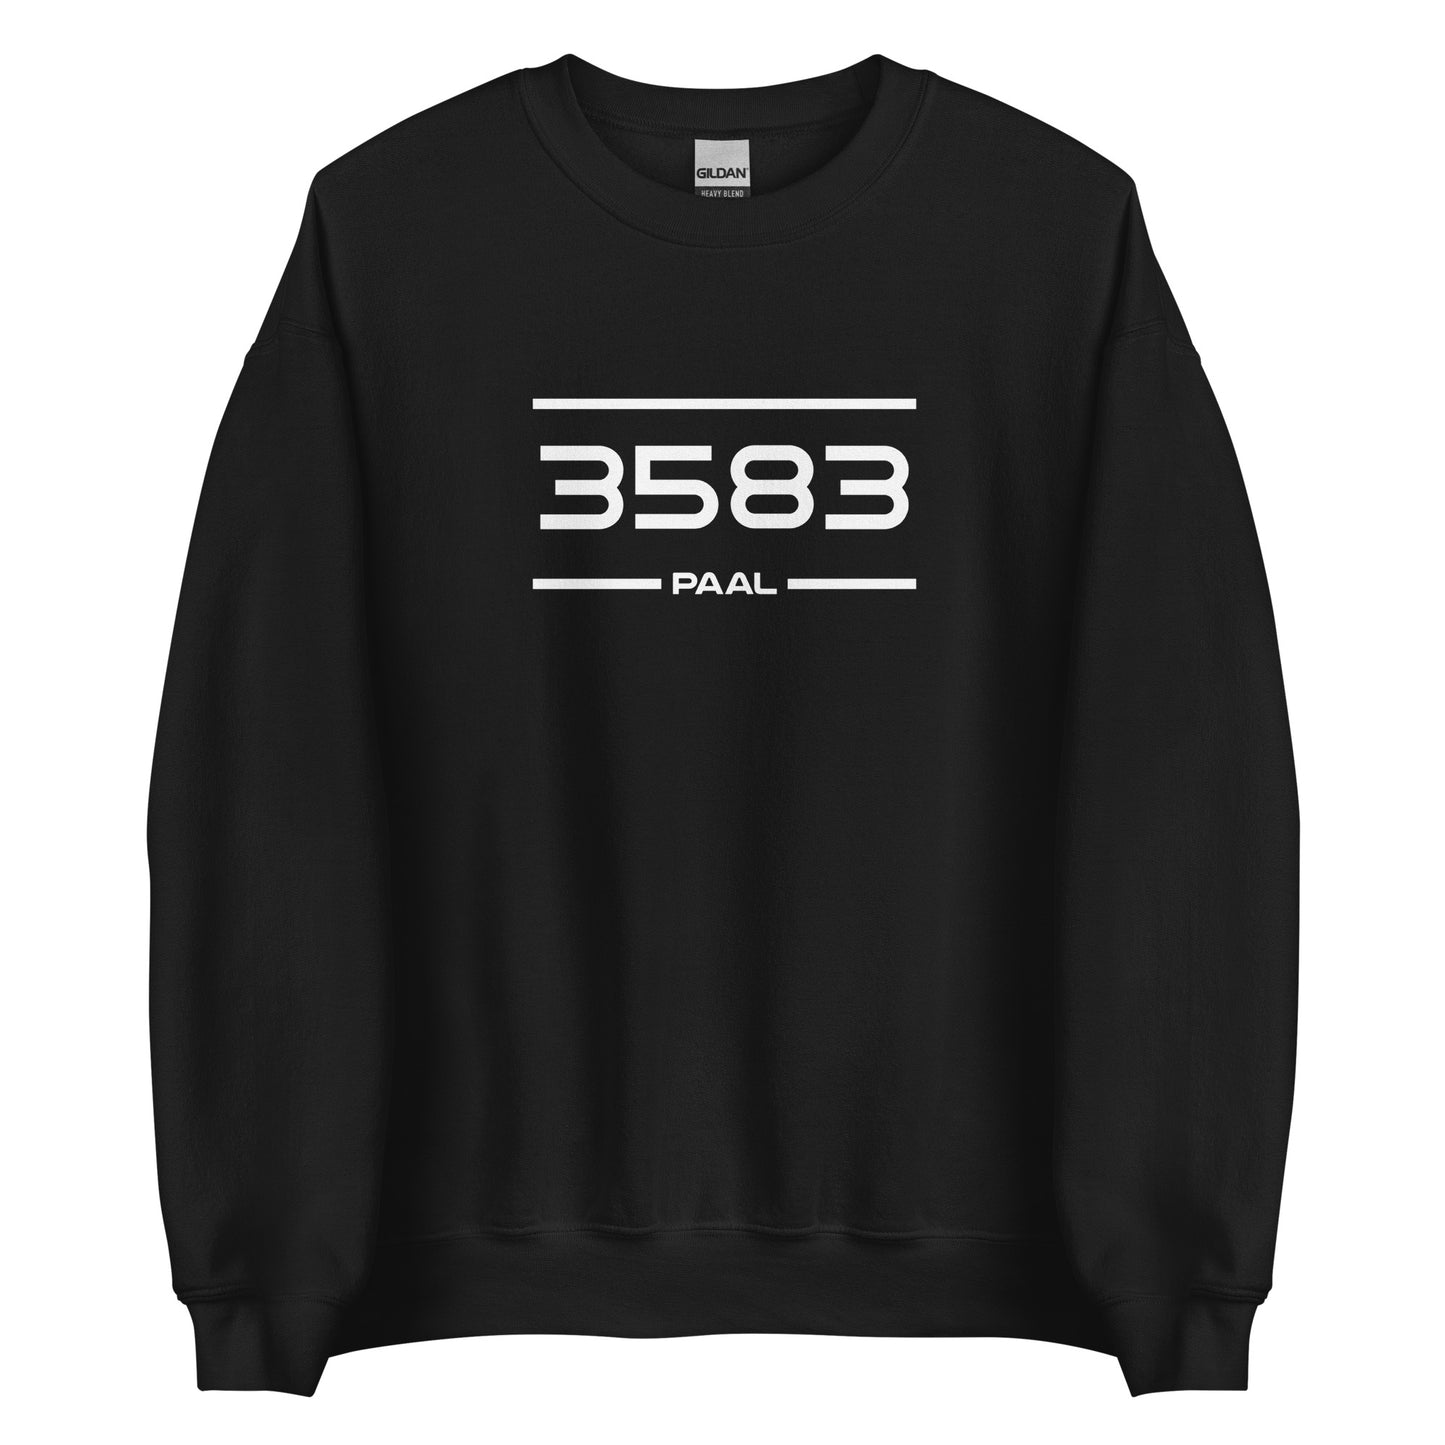 Sweater - 3583 - Paal (M/V)